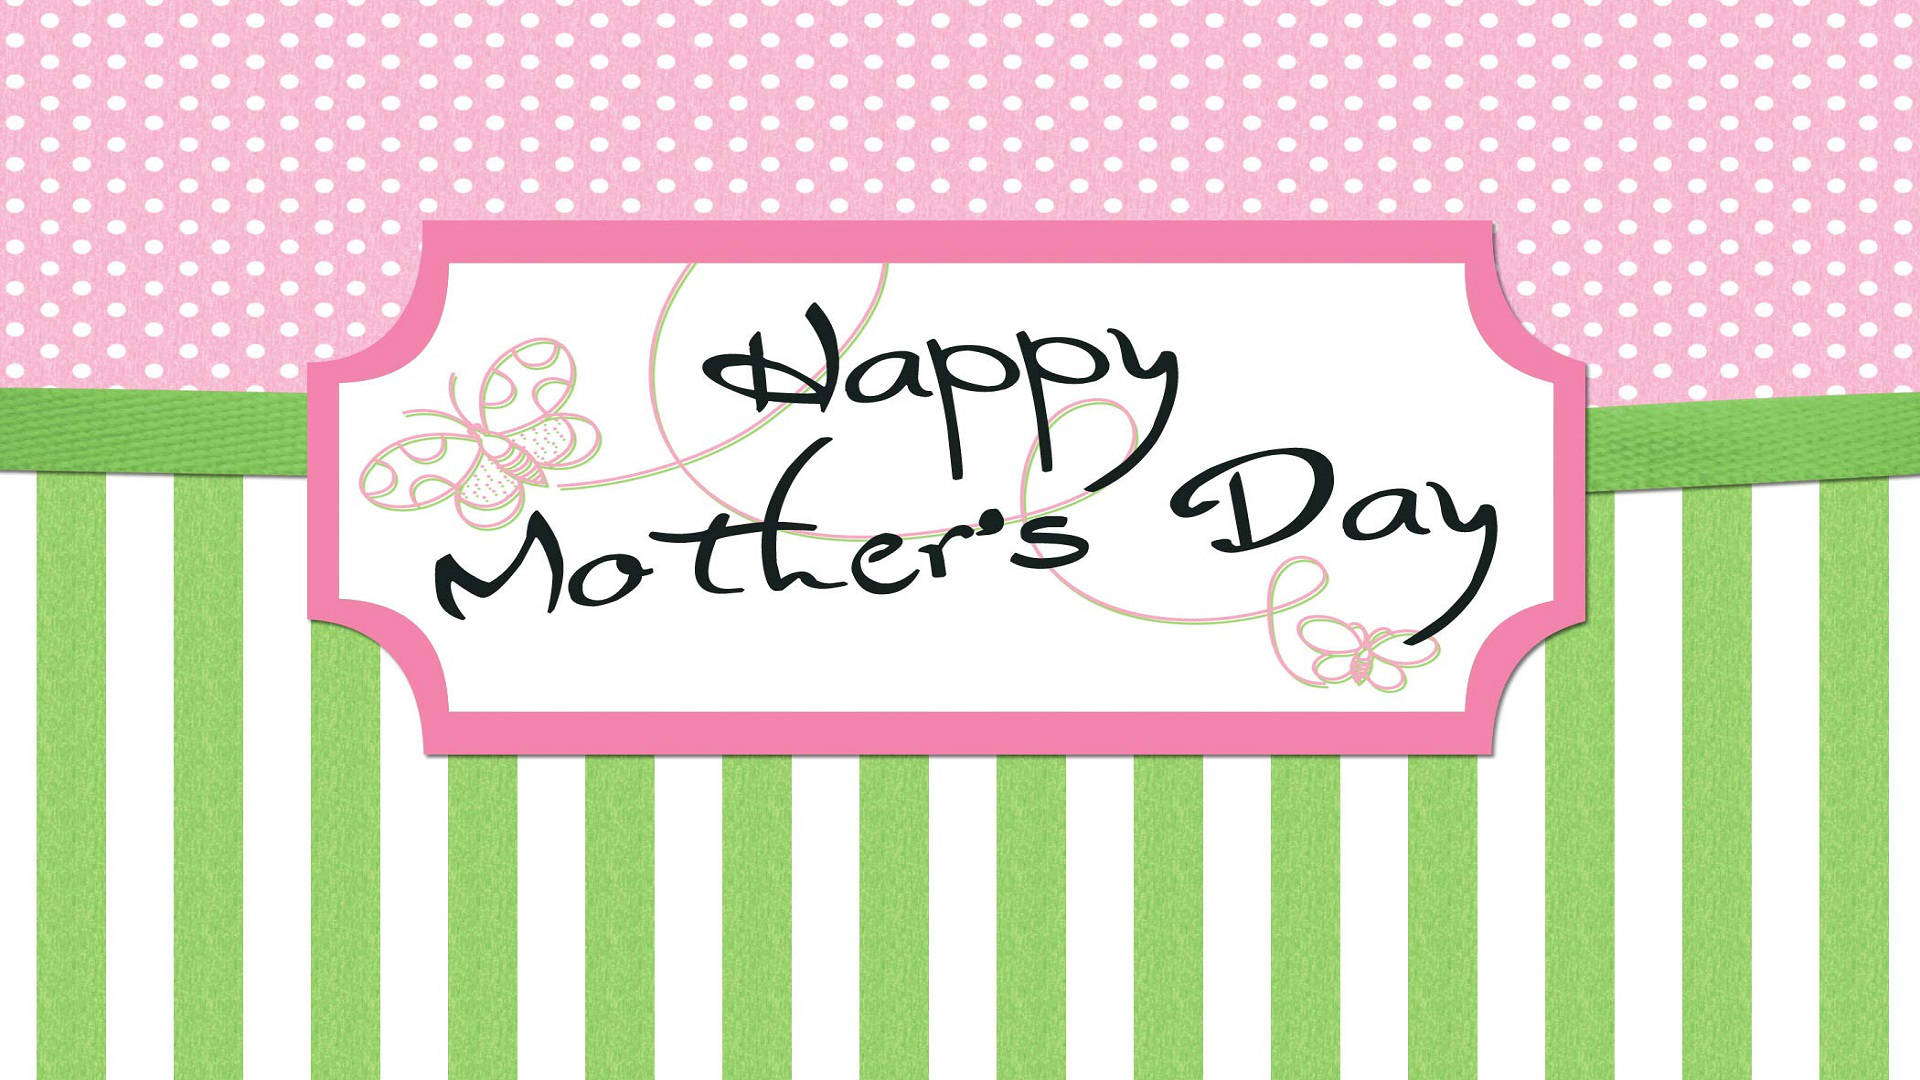 Happy Mothers Day Greeting Card Background